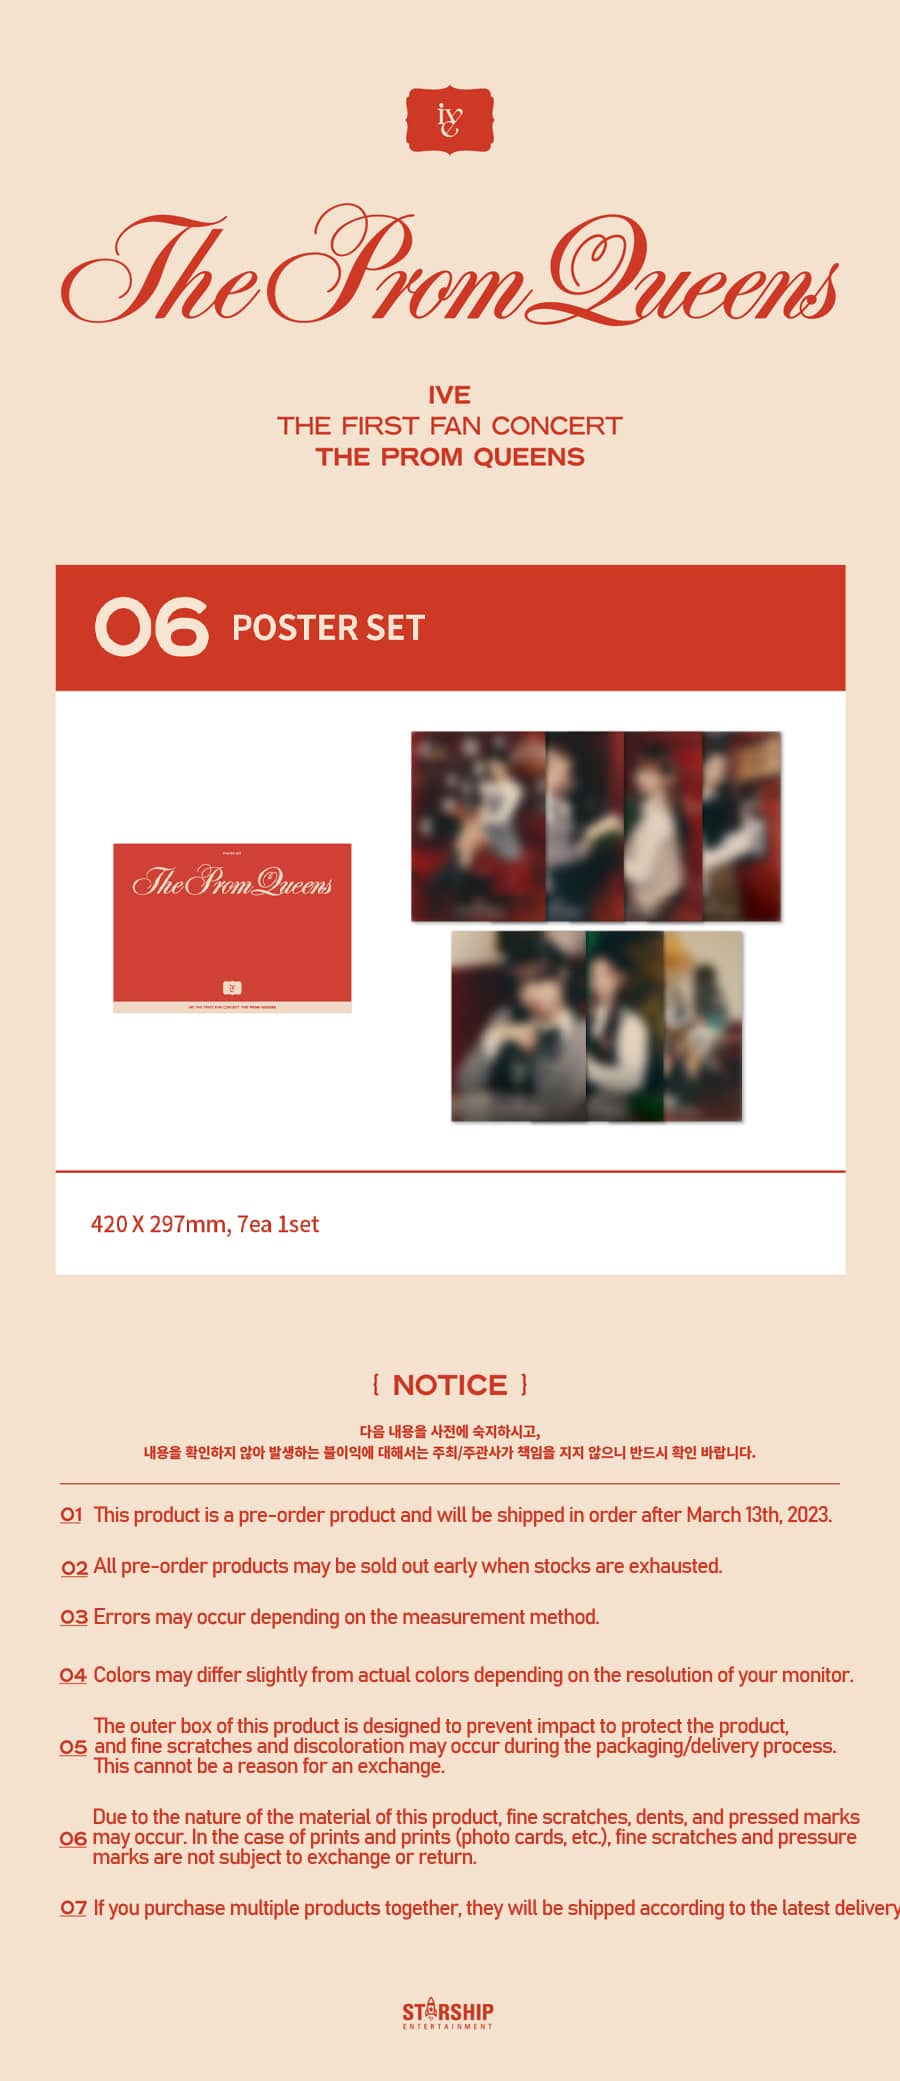 ive-the-prom-queens-random-poster-set-wholesale